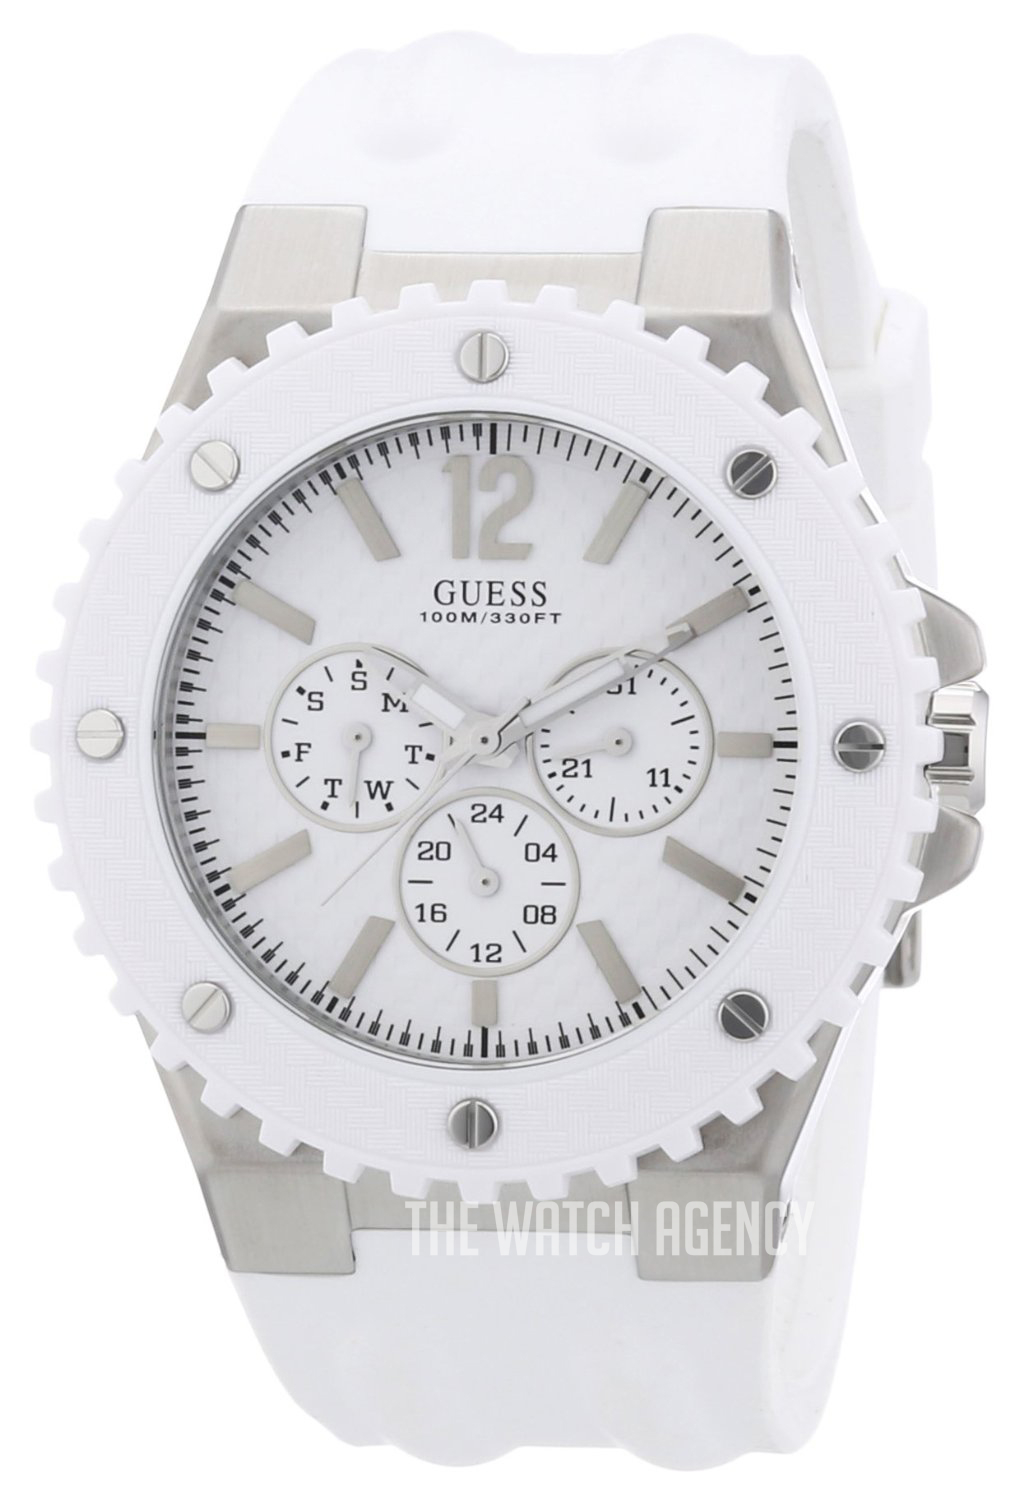 Guess W10603G1 | TheWatchAgency™ OverDrive